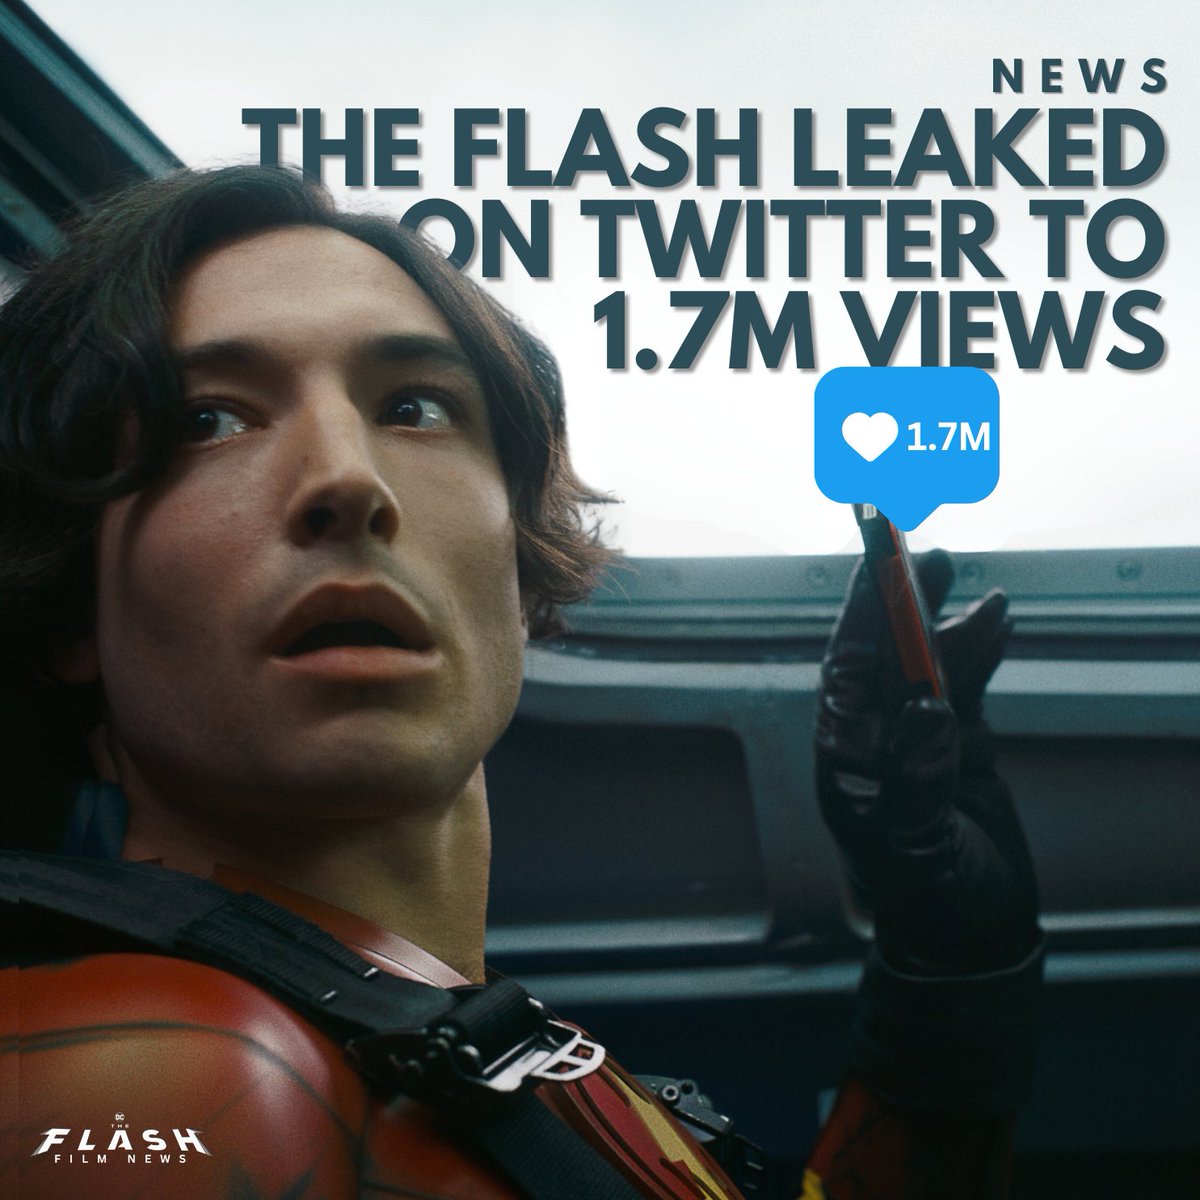 We knew y'all wanted to see it real bad #TheFlashMovie